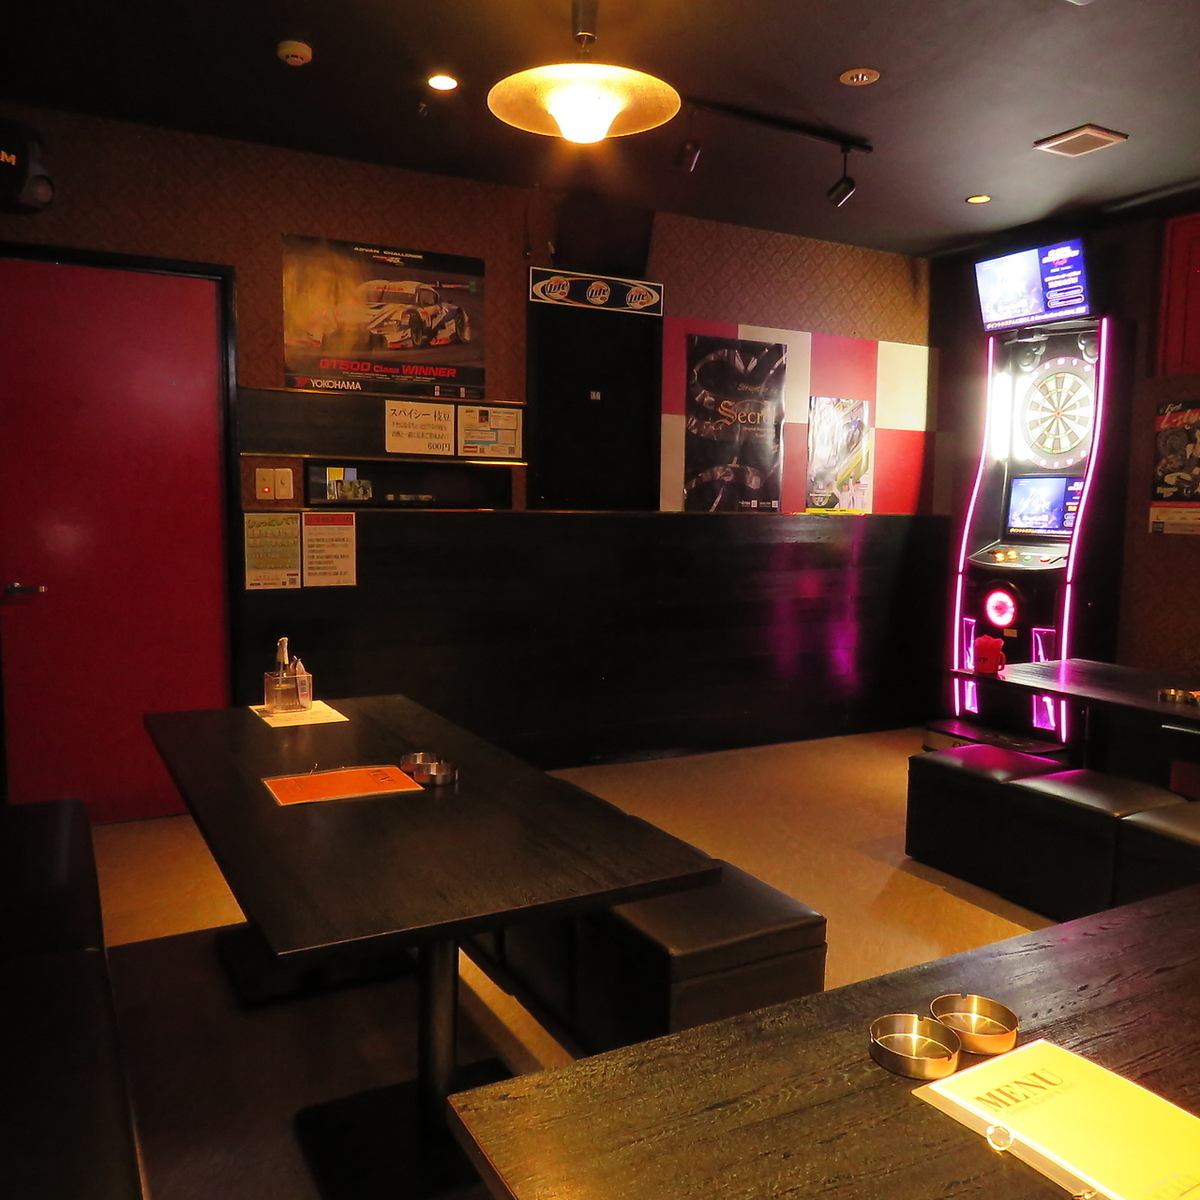 Private rooms available! Accommodates small to large groups! Open until 4am the next morning!